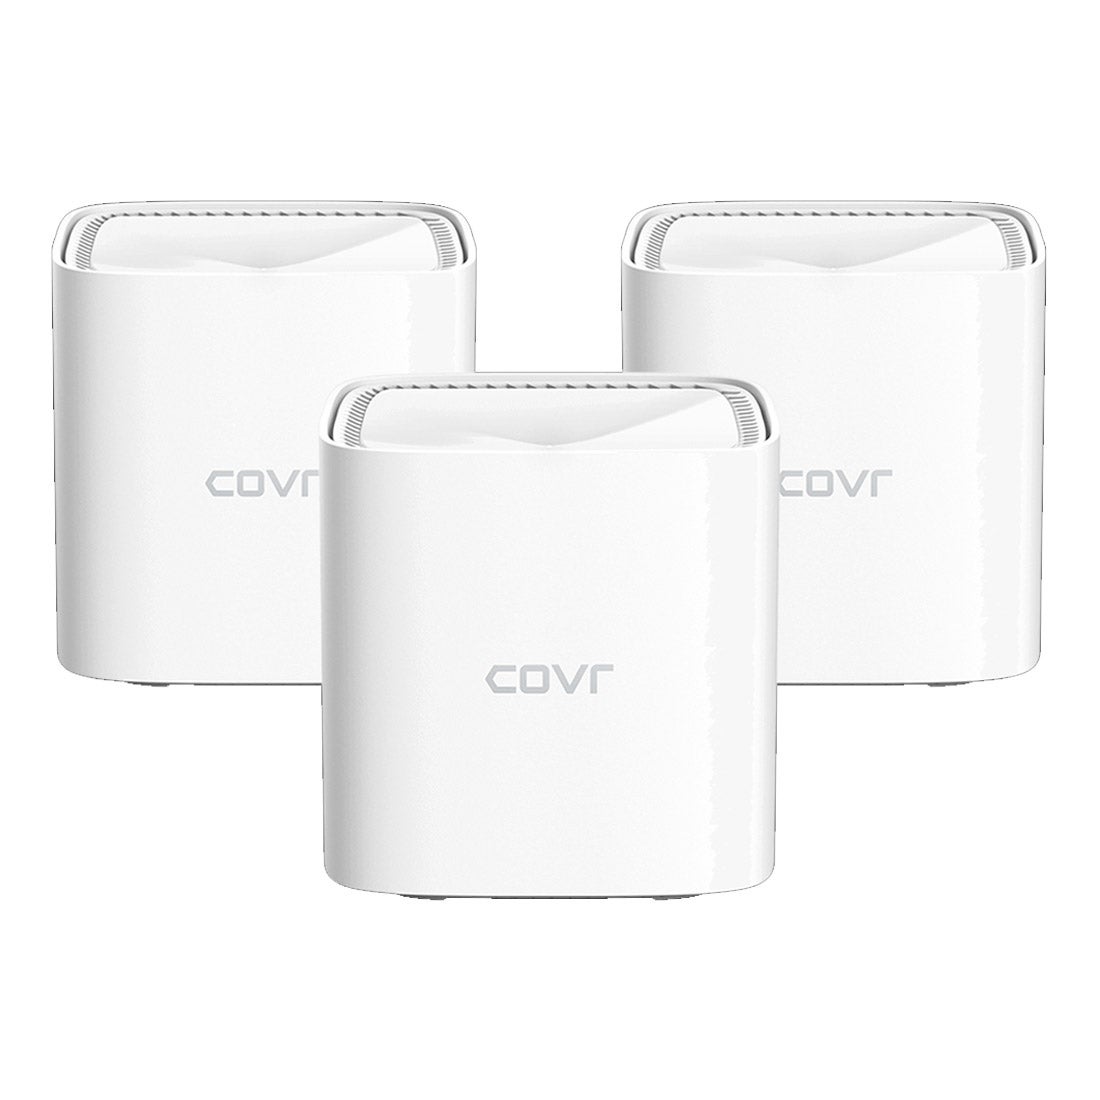 D-Link COVR-1103 AC1200 Dual Band Seamless Mesh Wi-Fi System (3 Pack)